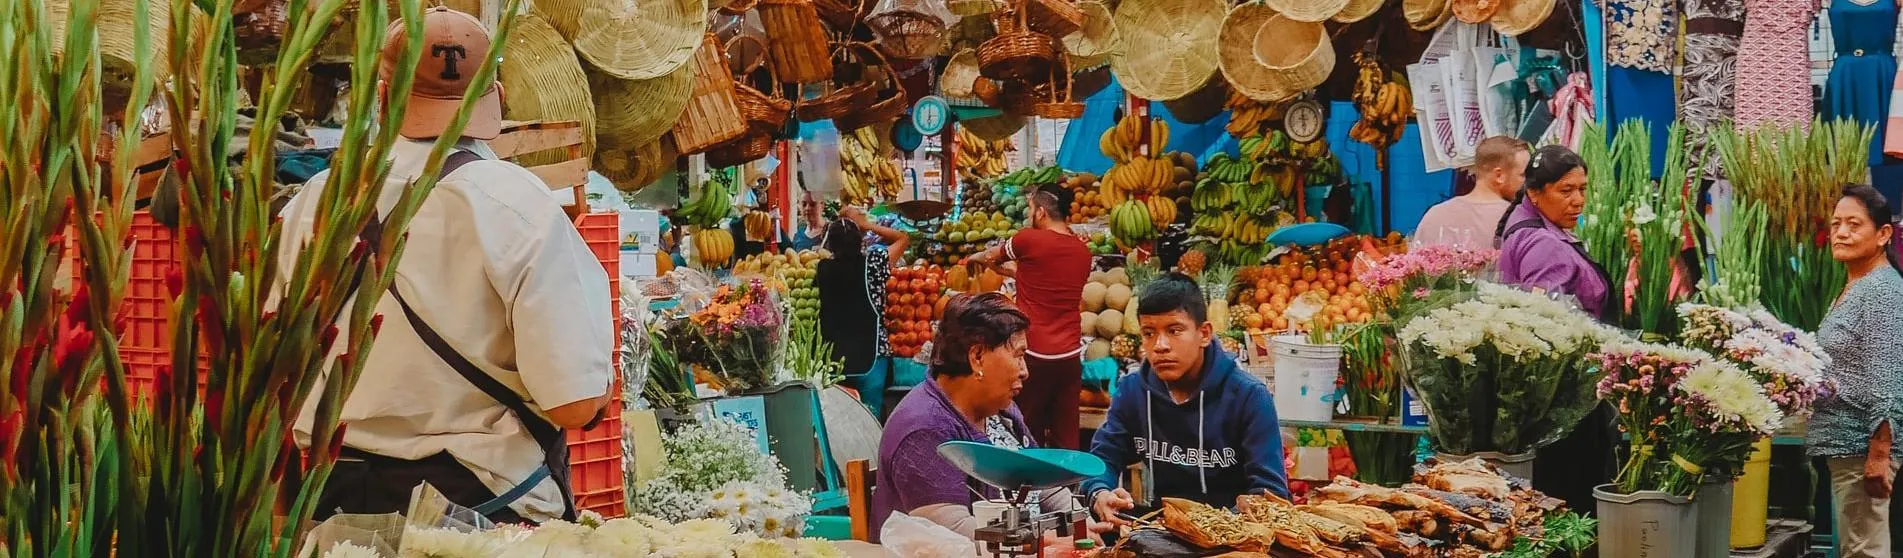 Marketplace in Mexico